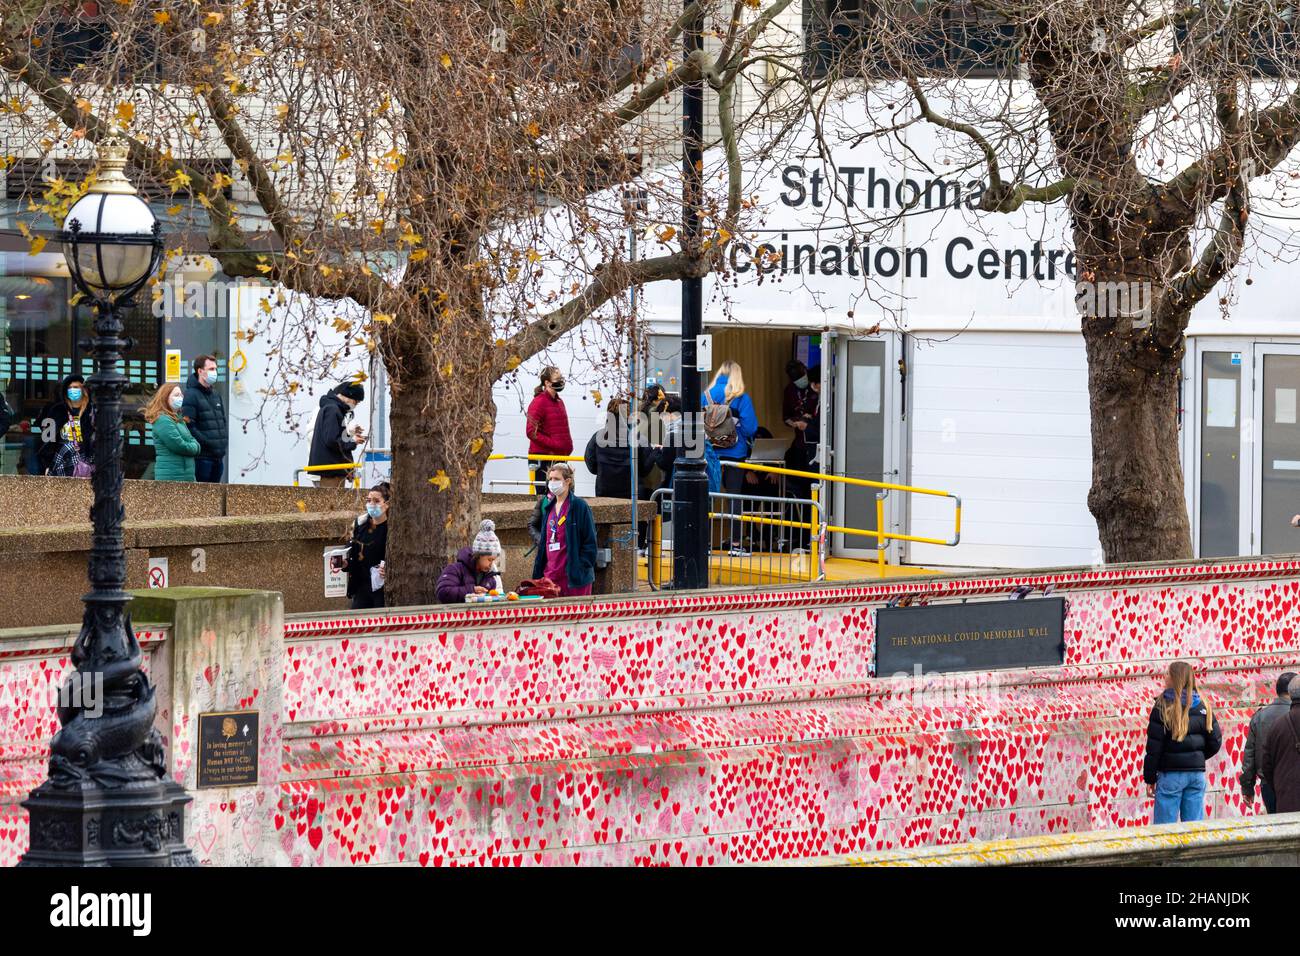 London, UK. 14th Dec, 2021. queues for Covid booster vaccine at St Thomas' hospital Westminster London The National Covid Memorial Wall is in the foreground, Credit: Ian Davidson/Alamy Live News Stock Photo